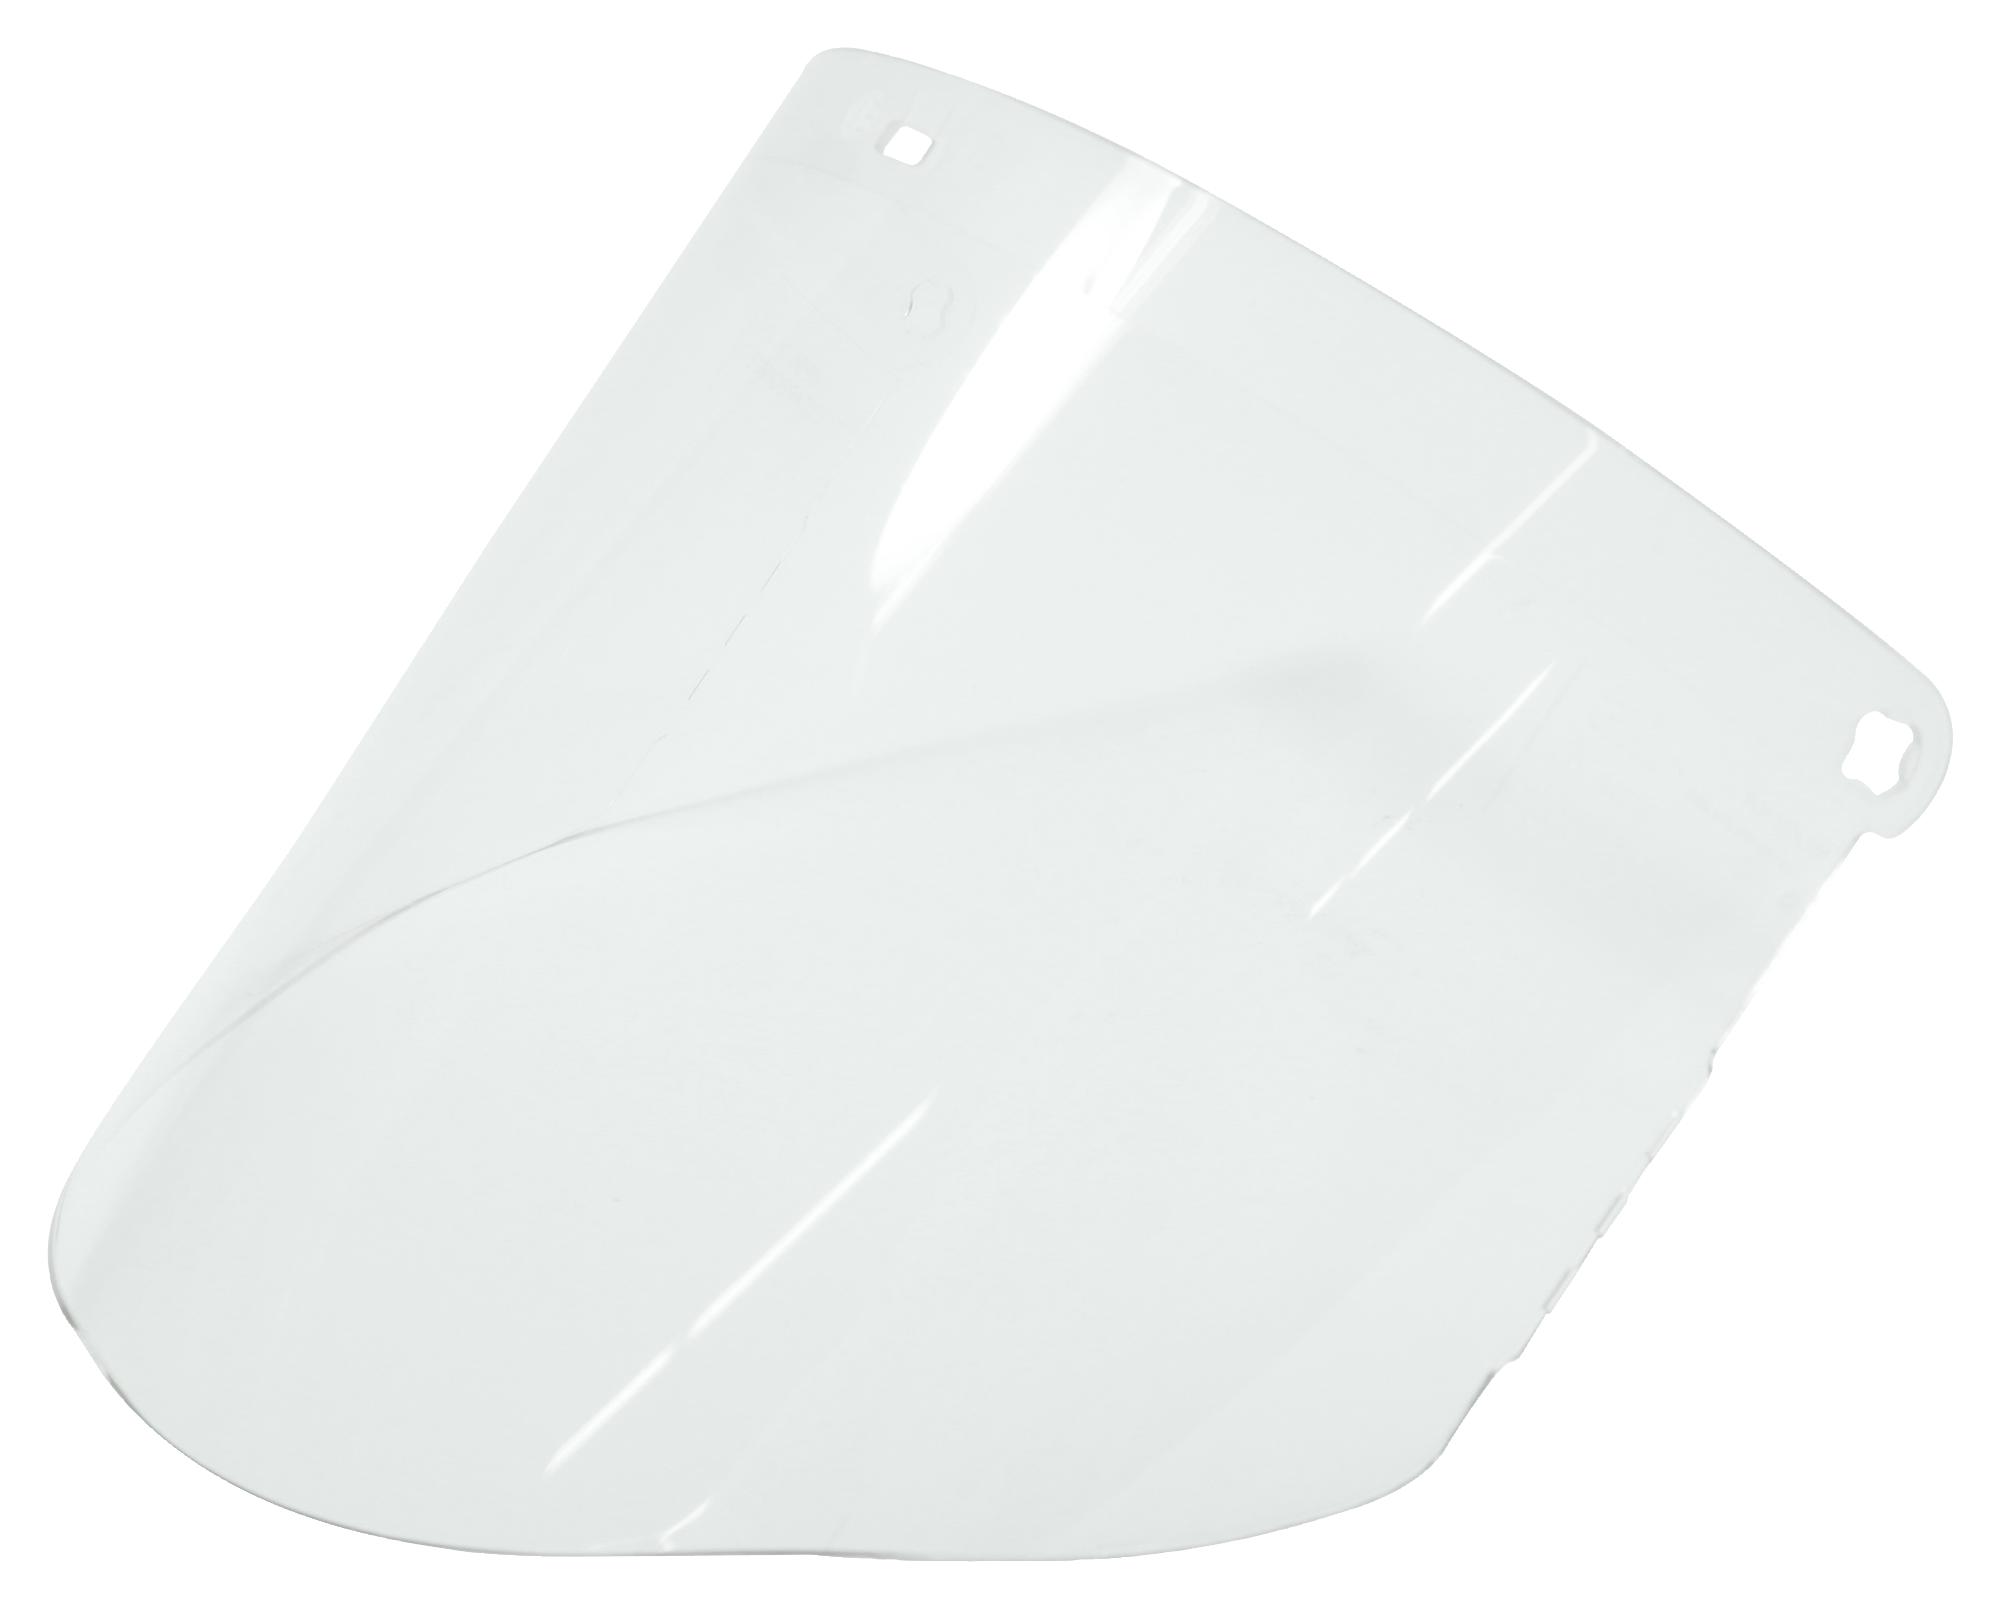 3M WP96 CLEAR POLYCARBONATE FACESHIELD - H8A Deluxe Ratchet Headgear